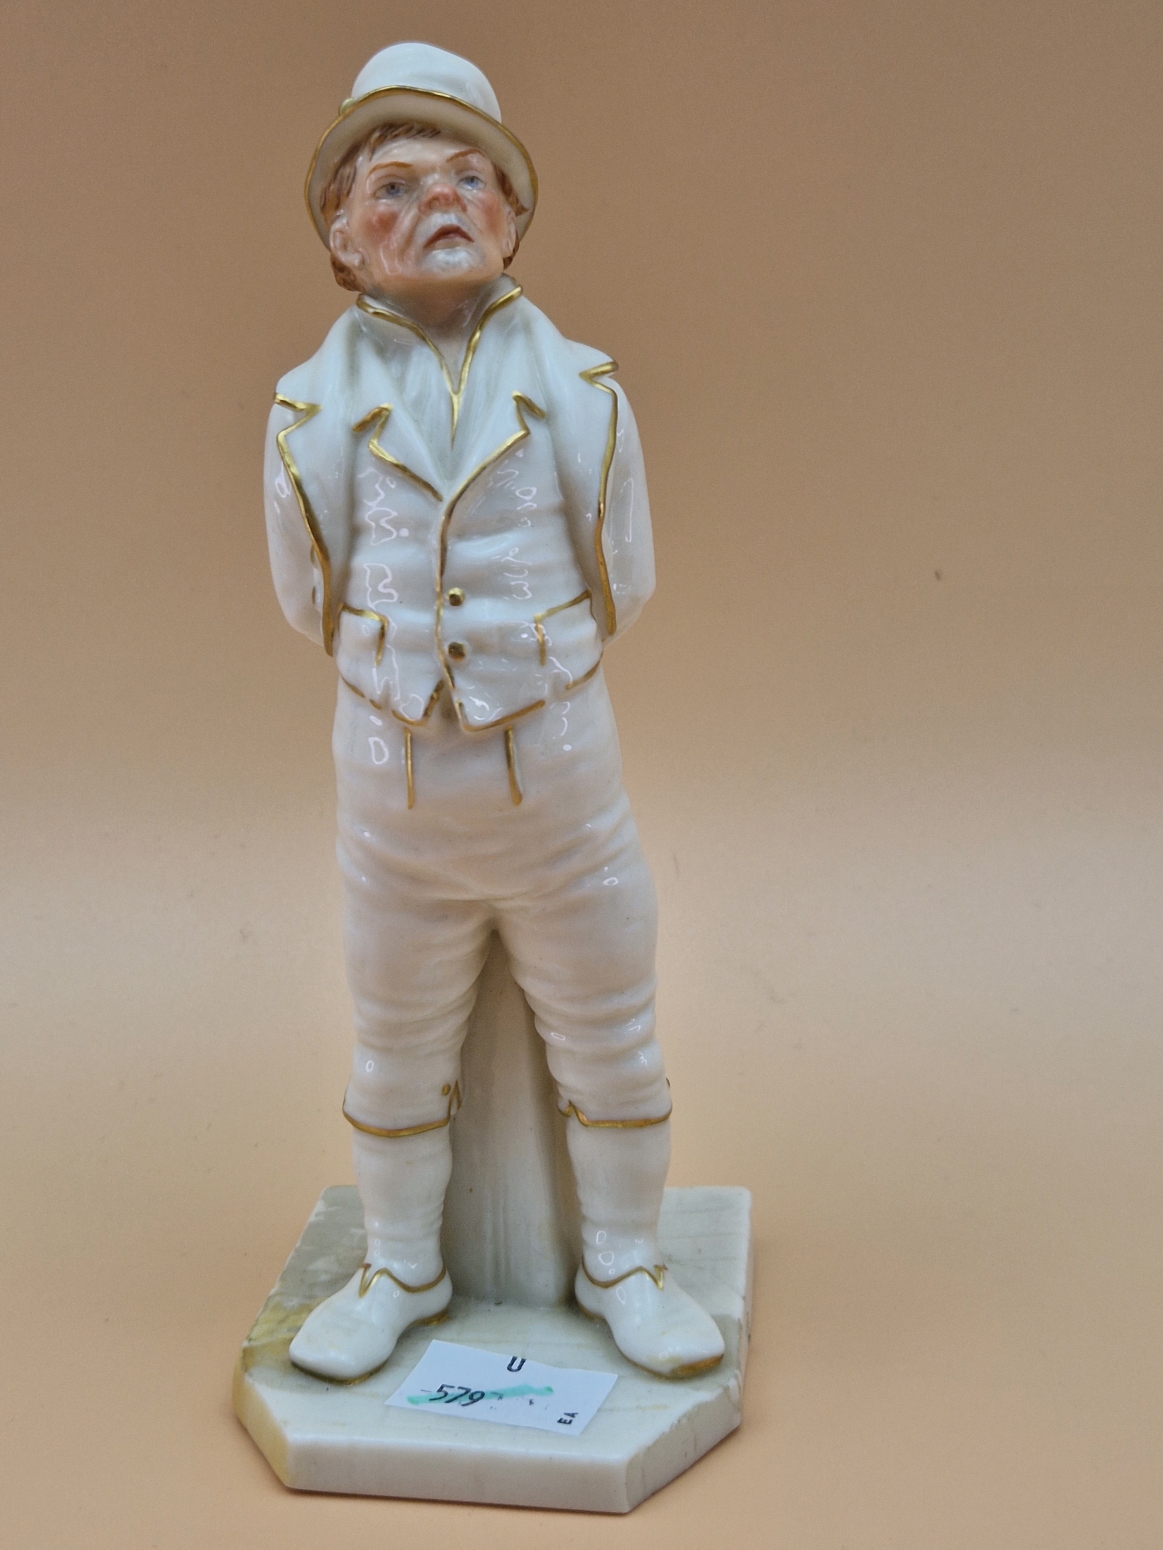 A VICTORIAN ROYAL WORCESTER FIGURE OF A BOY SEATED ON A BRANCH OVERLOOKING A GILT EDGED BASKET. W - Image 6 of 9